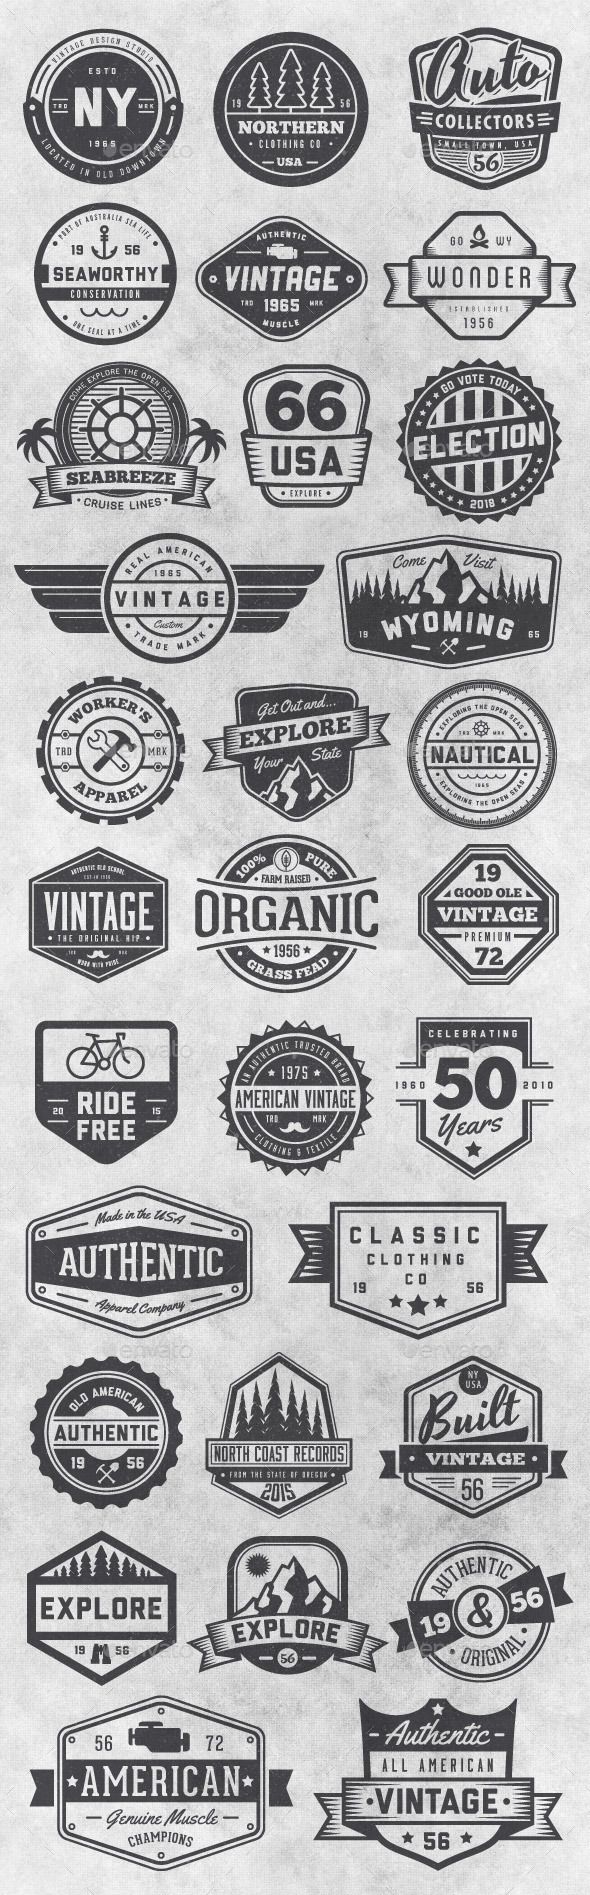 Typography - 30 Vintage Style Badges and Logos Vol 6 - Badges ...